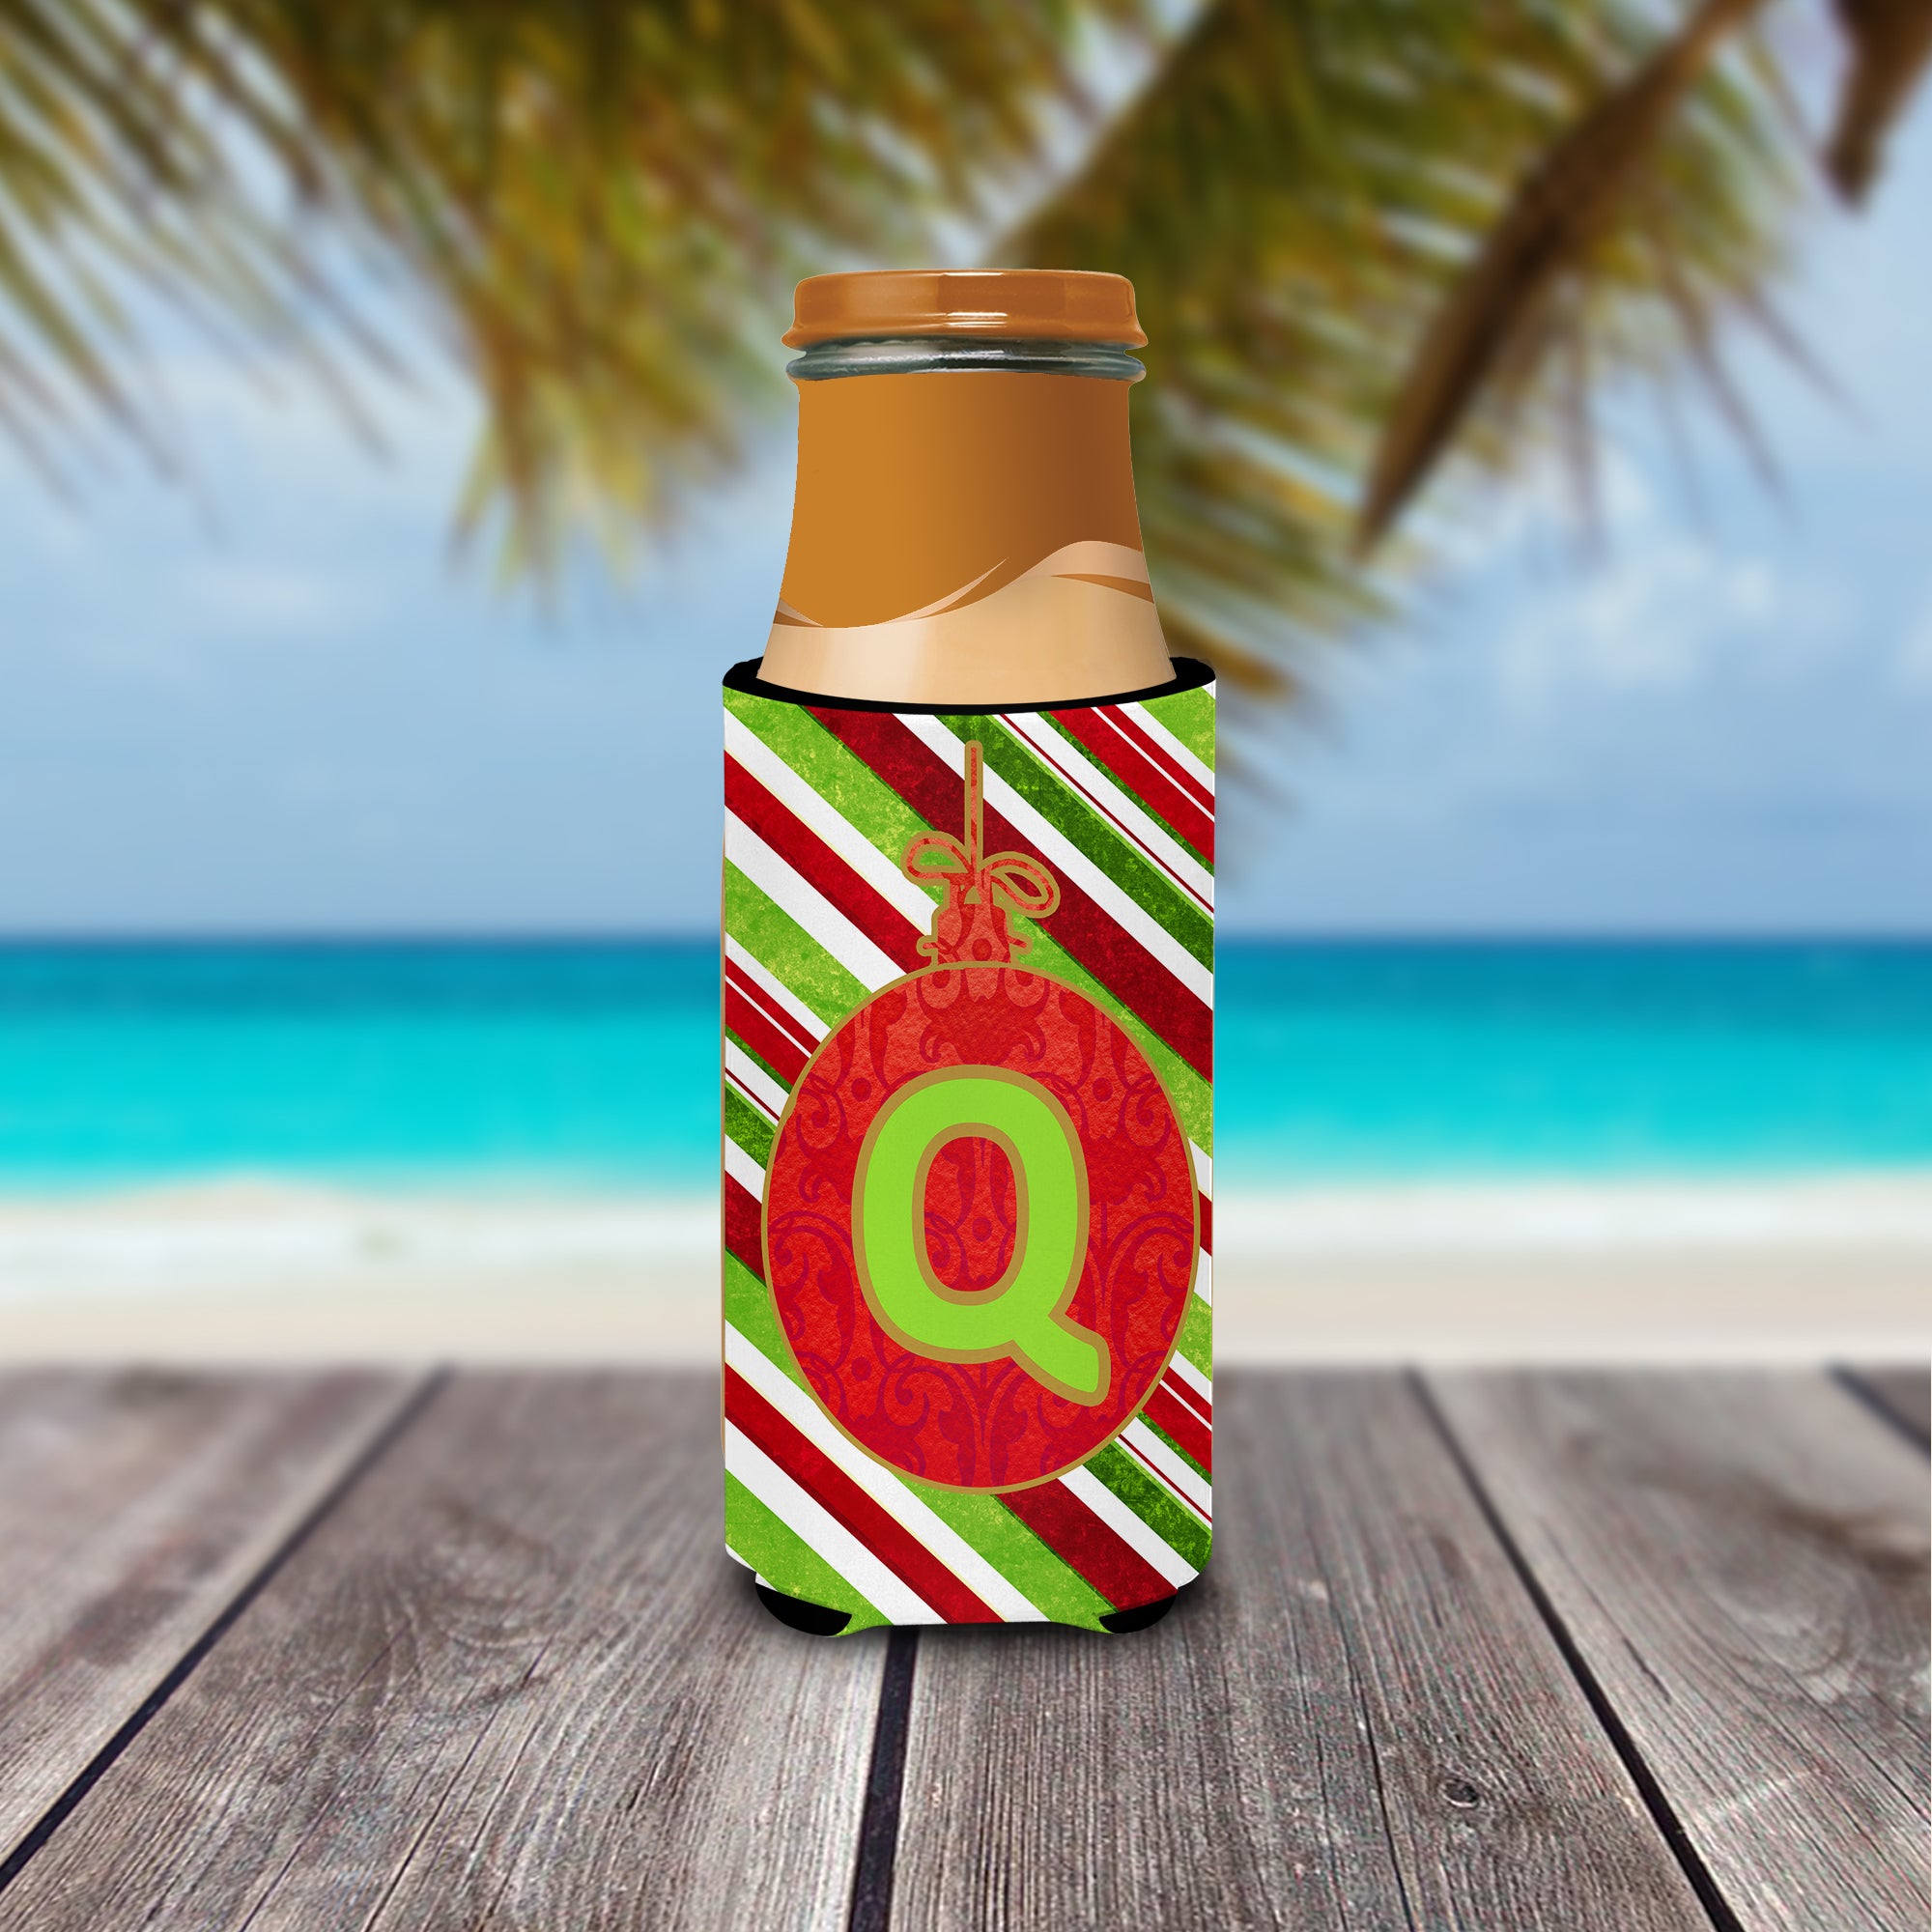 Christmas Oranment Holiday Monogram Initial  Letter Q Ultra Beverage Insulators for slim cans CJ1039-QMUK.